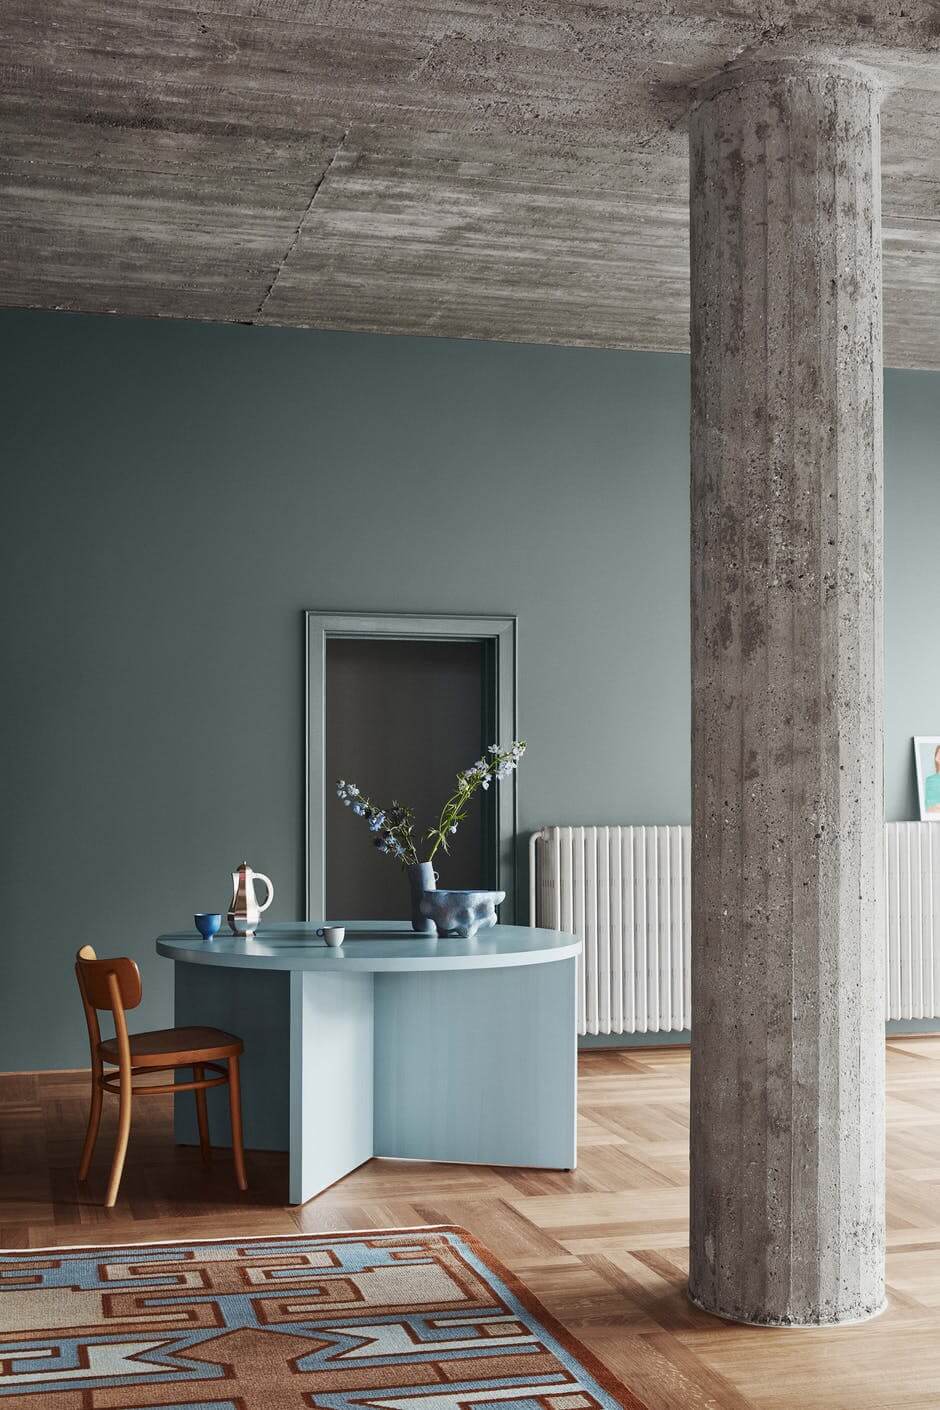 color trends 2020 inspired by nature nordroom23 The Color Trends For 2020 Are Inspired by Nature